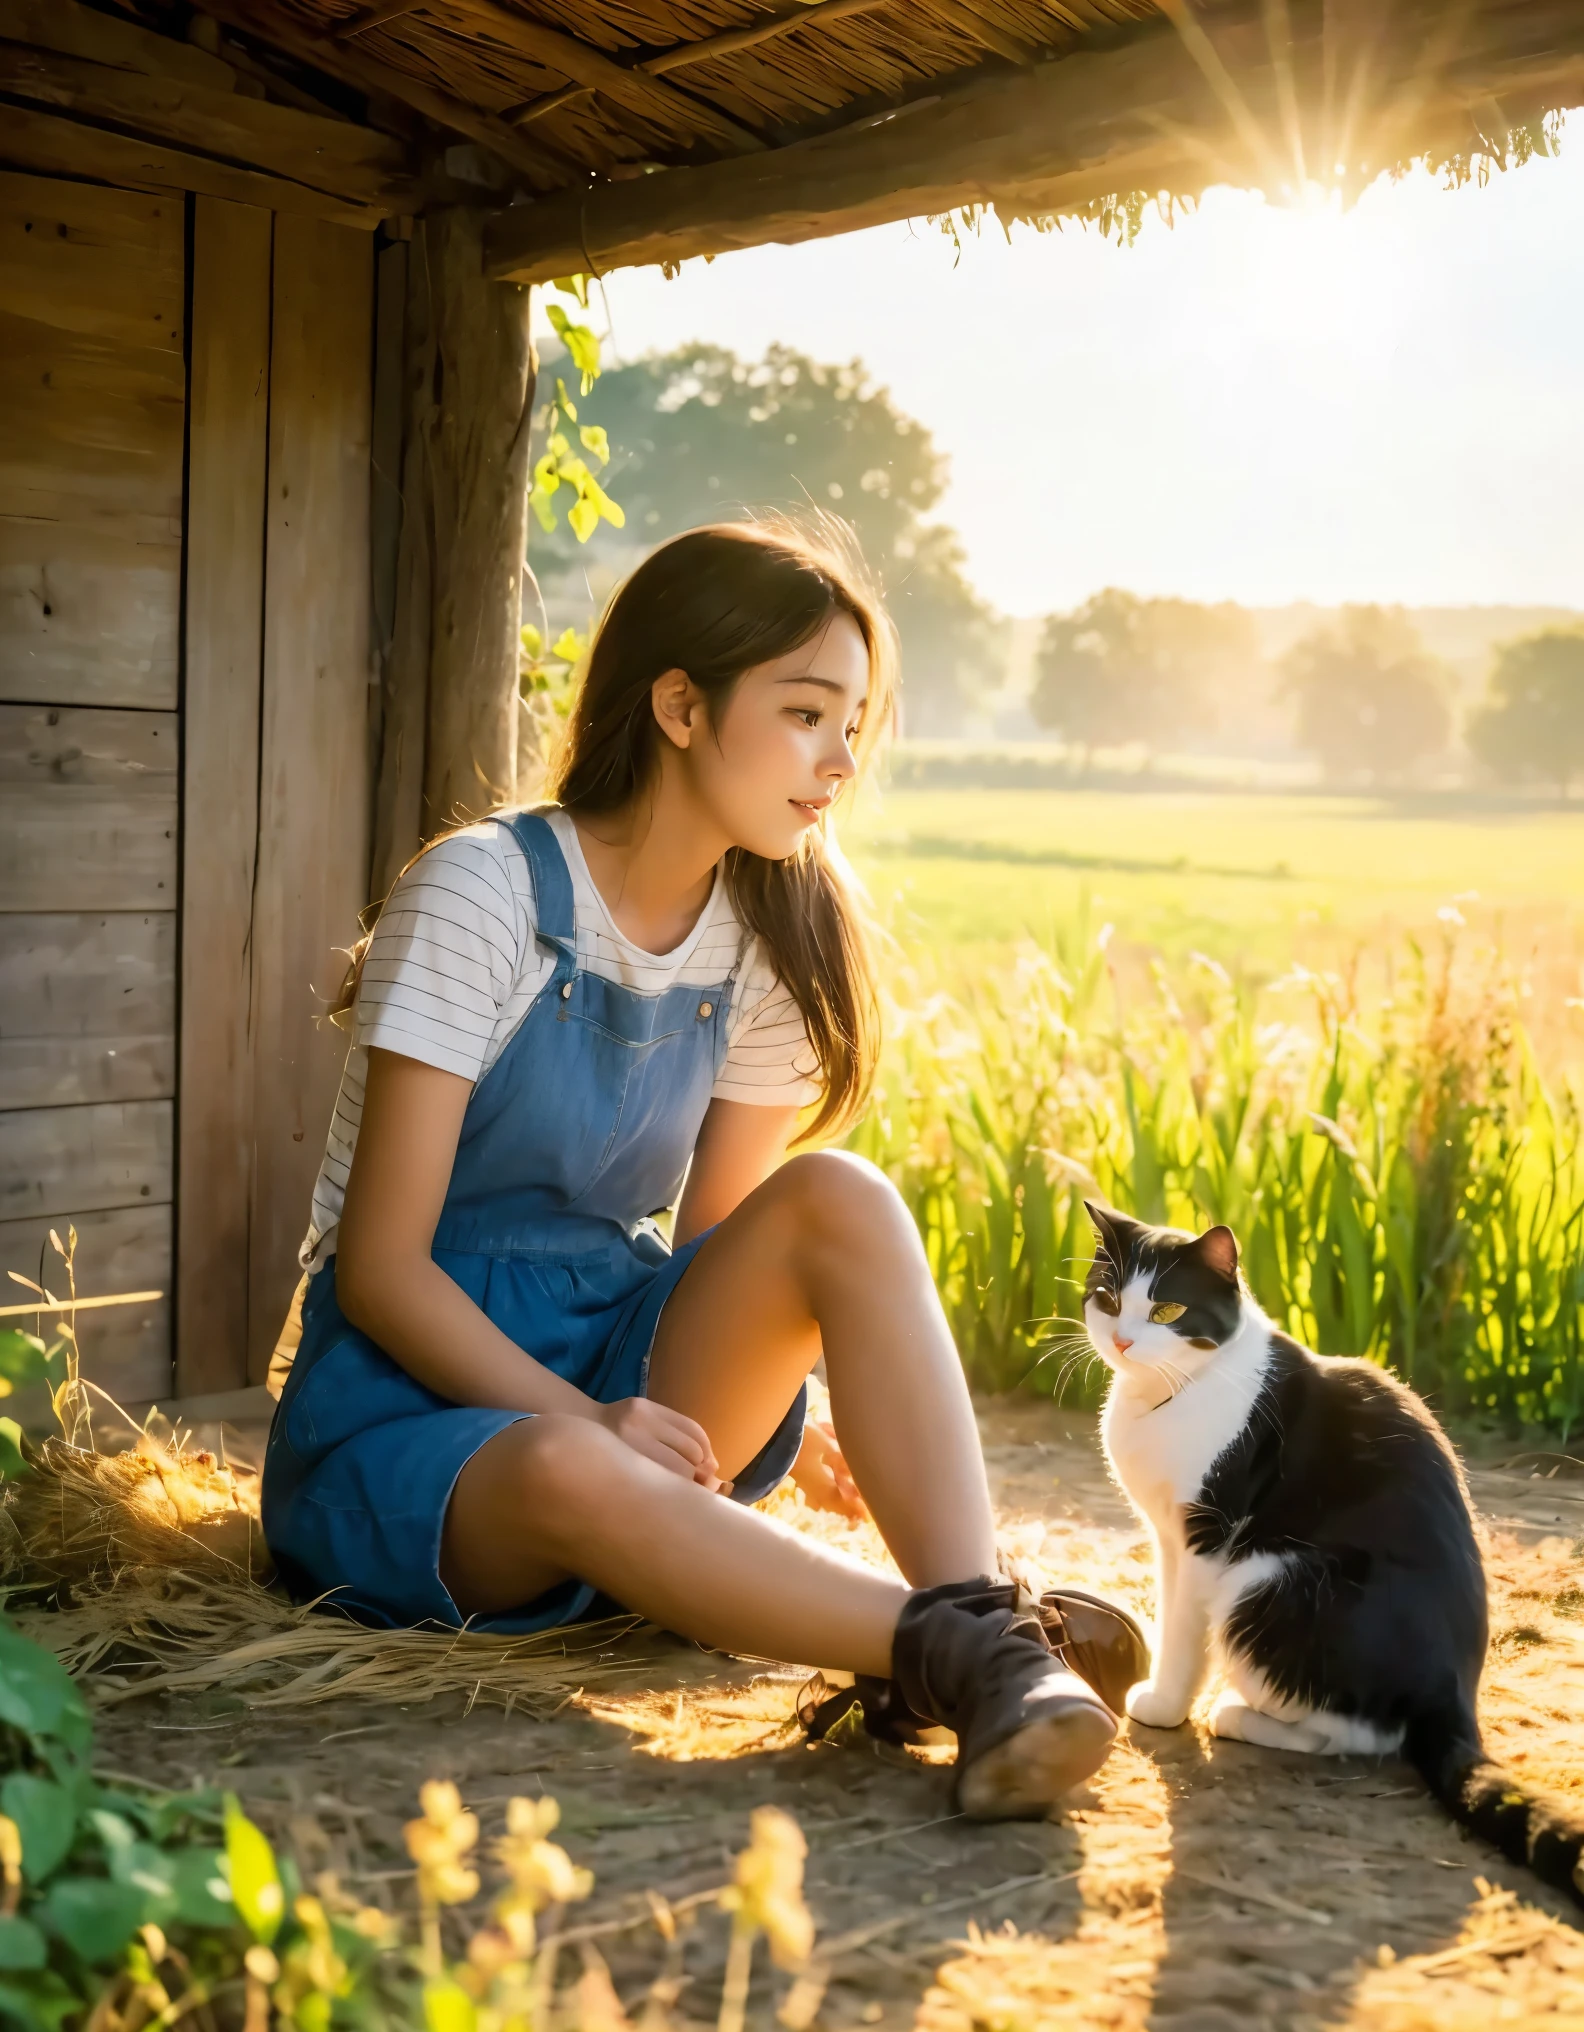 Photography capturing the rustic charm of rural life, depicting a contented cat and a girl basking in the warm glow of the setting sun as the day draws to a peaceful close in the countryside. The scene exudes tranquility and simplicity, with the girl and the cat immersed in a moment of quiet joy and companionship amidst the idyllic rural setting. The golden rays of sunlight enhance the warmth and serenity of the scene, inviting viewers to savor the beauty of nature and the bond between humans and animals in a harmonious countryside tableau